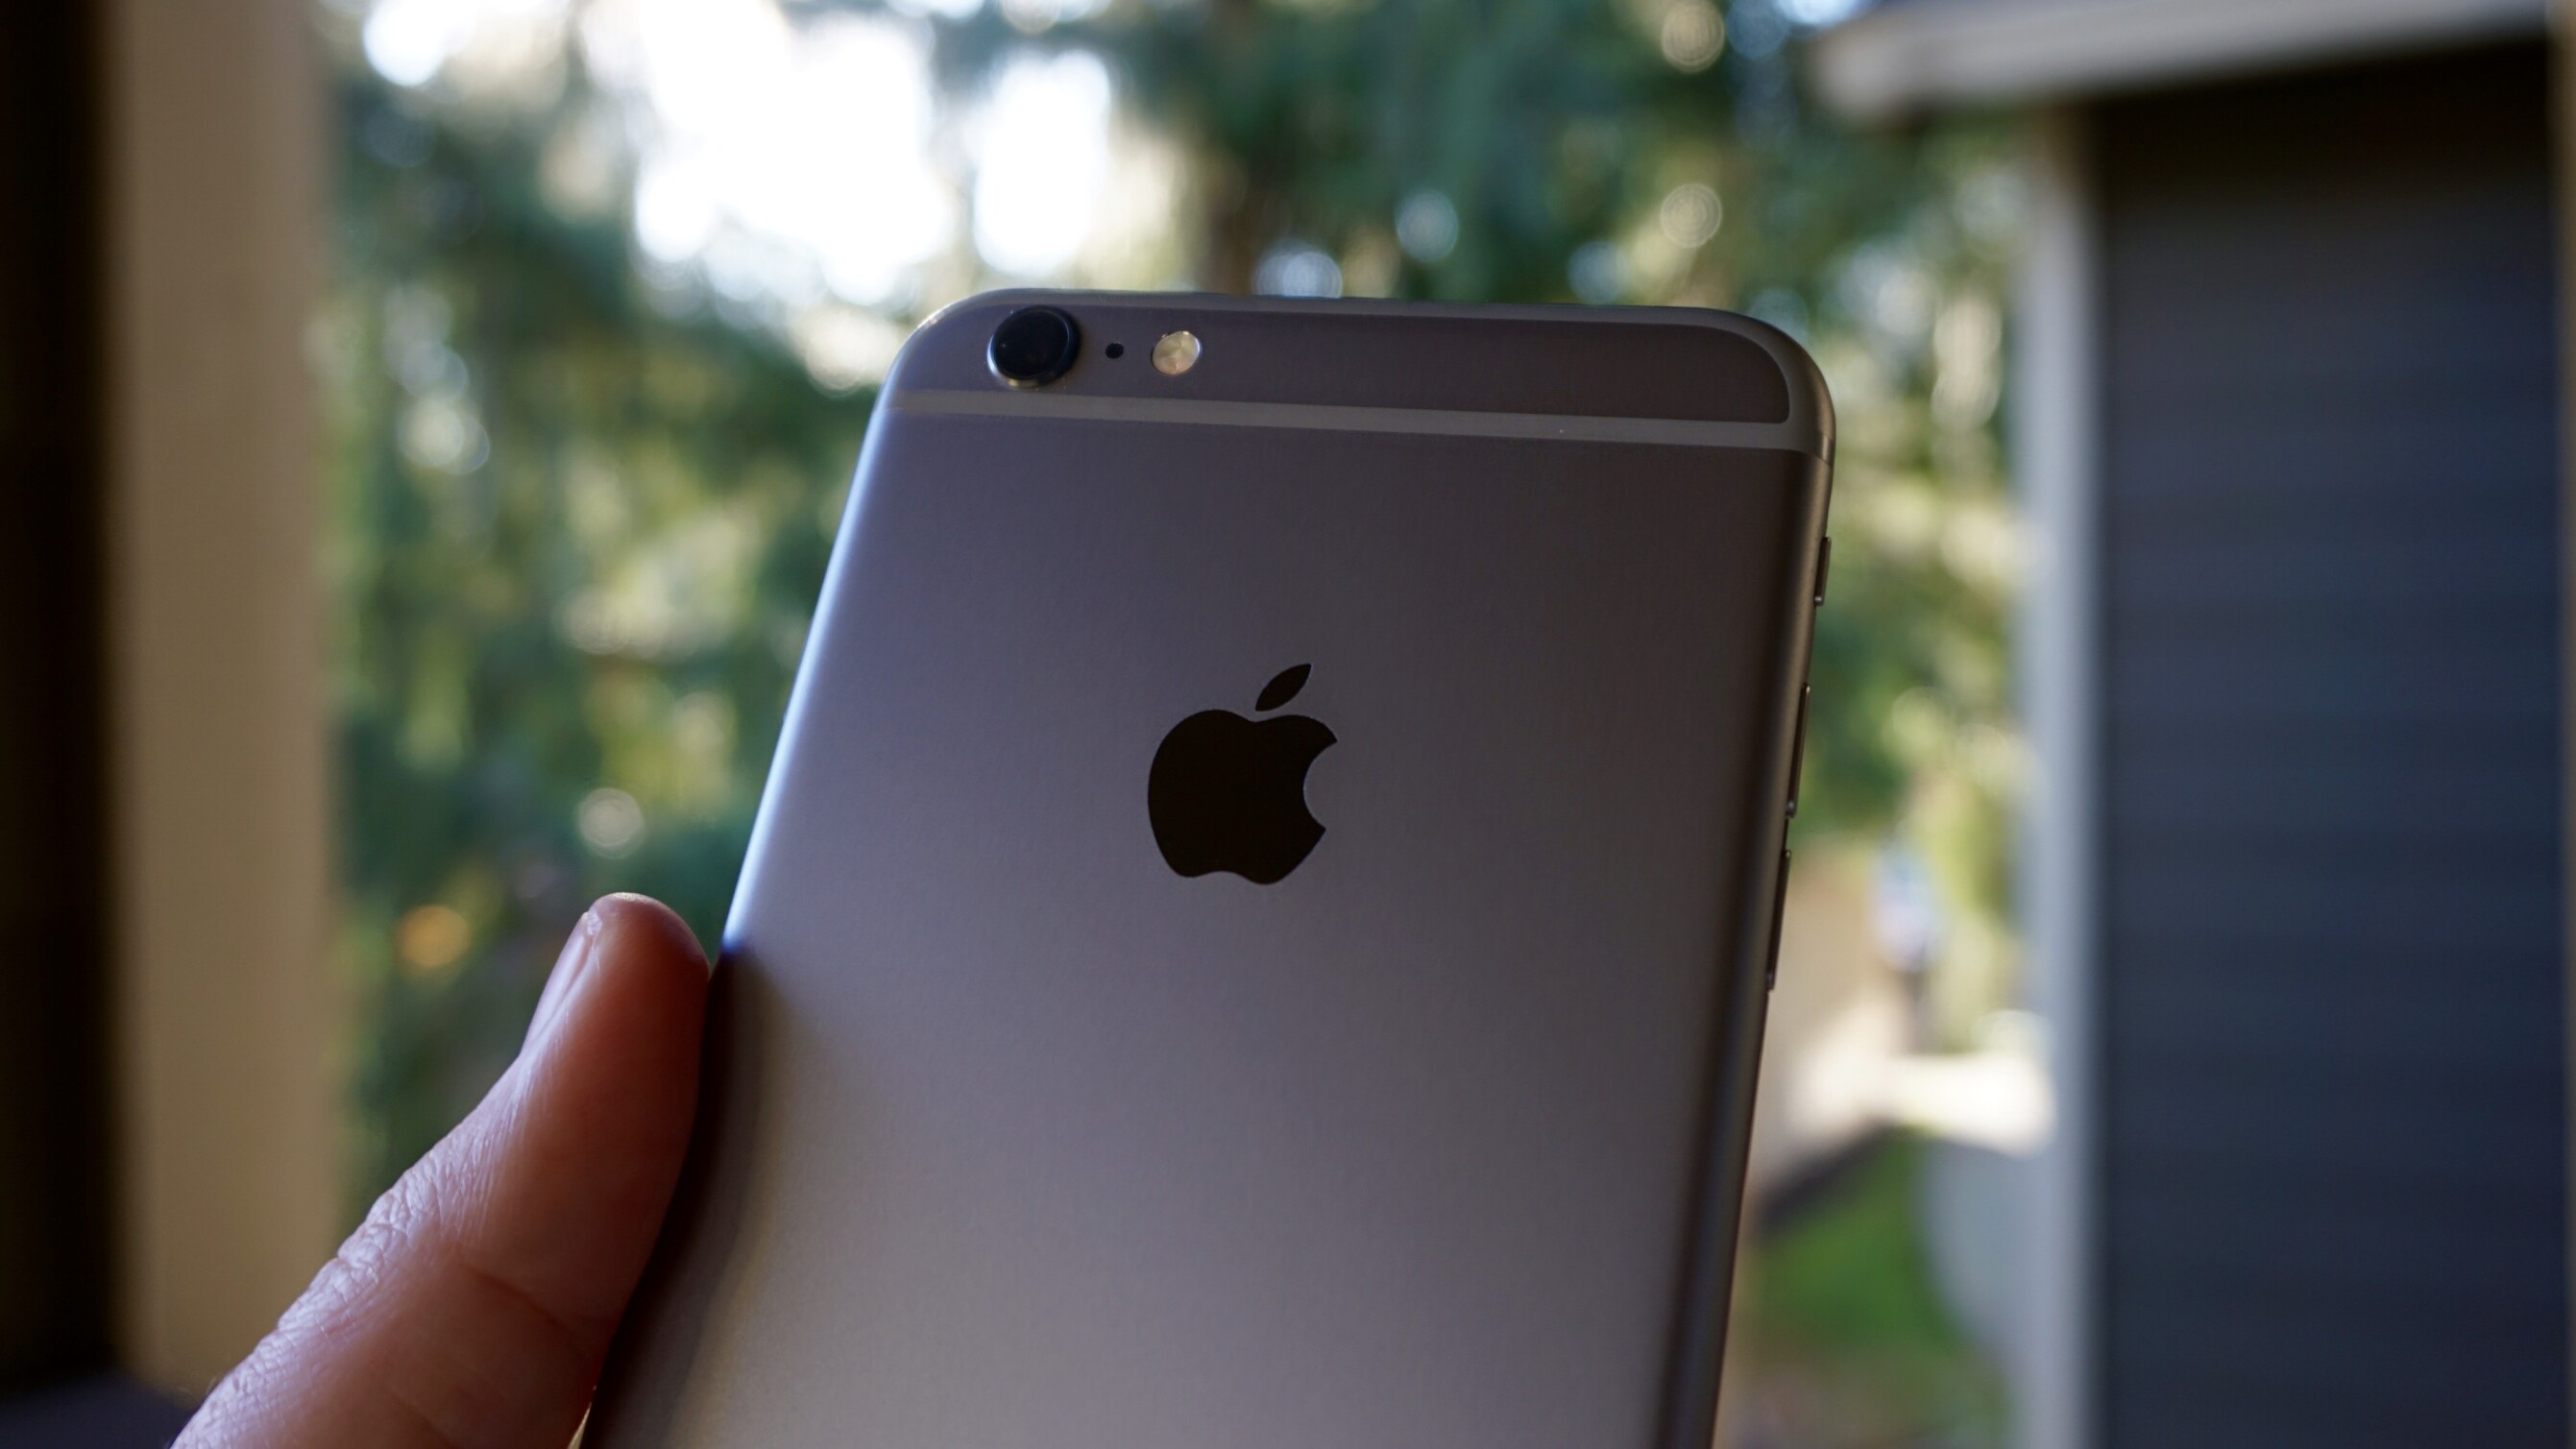 Should you buy a new iPhone 6S or 6S Plus, or wait for the iPhone 7? A guide